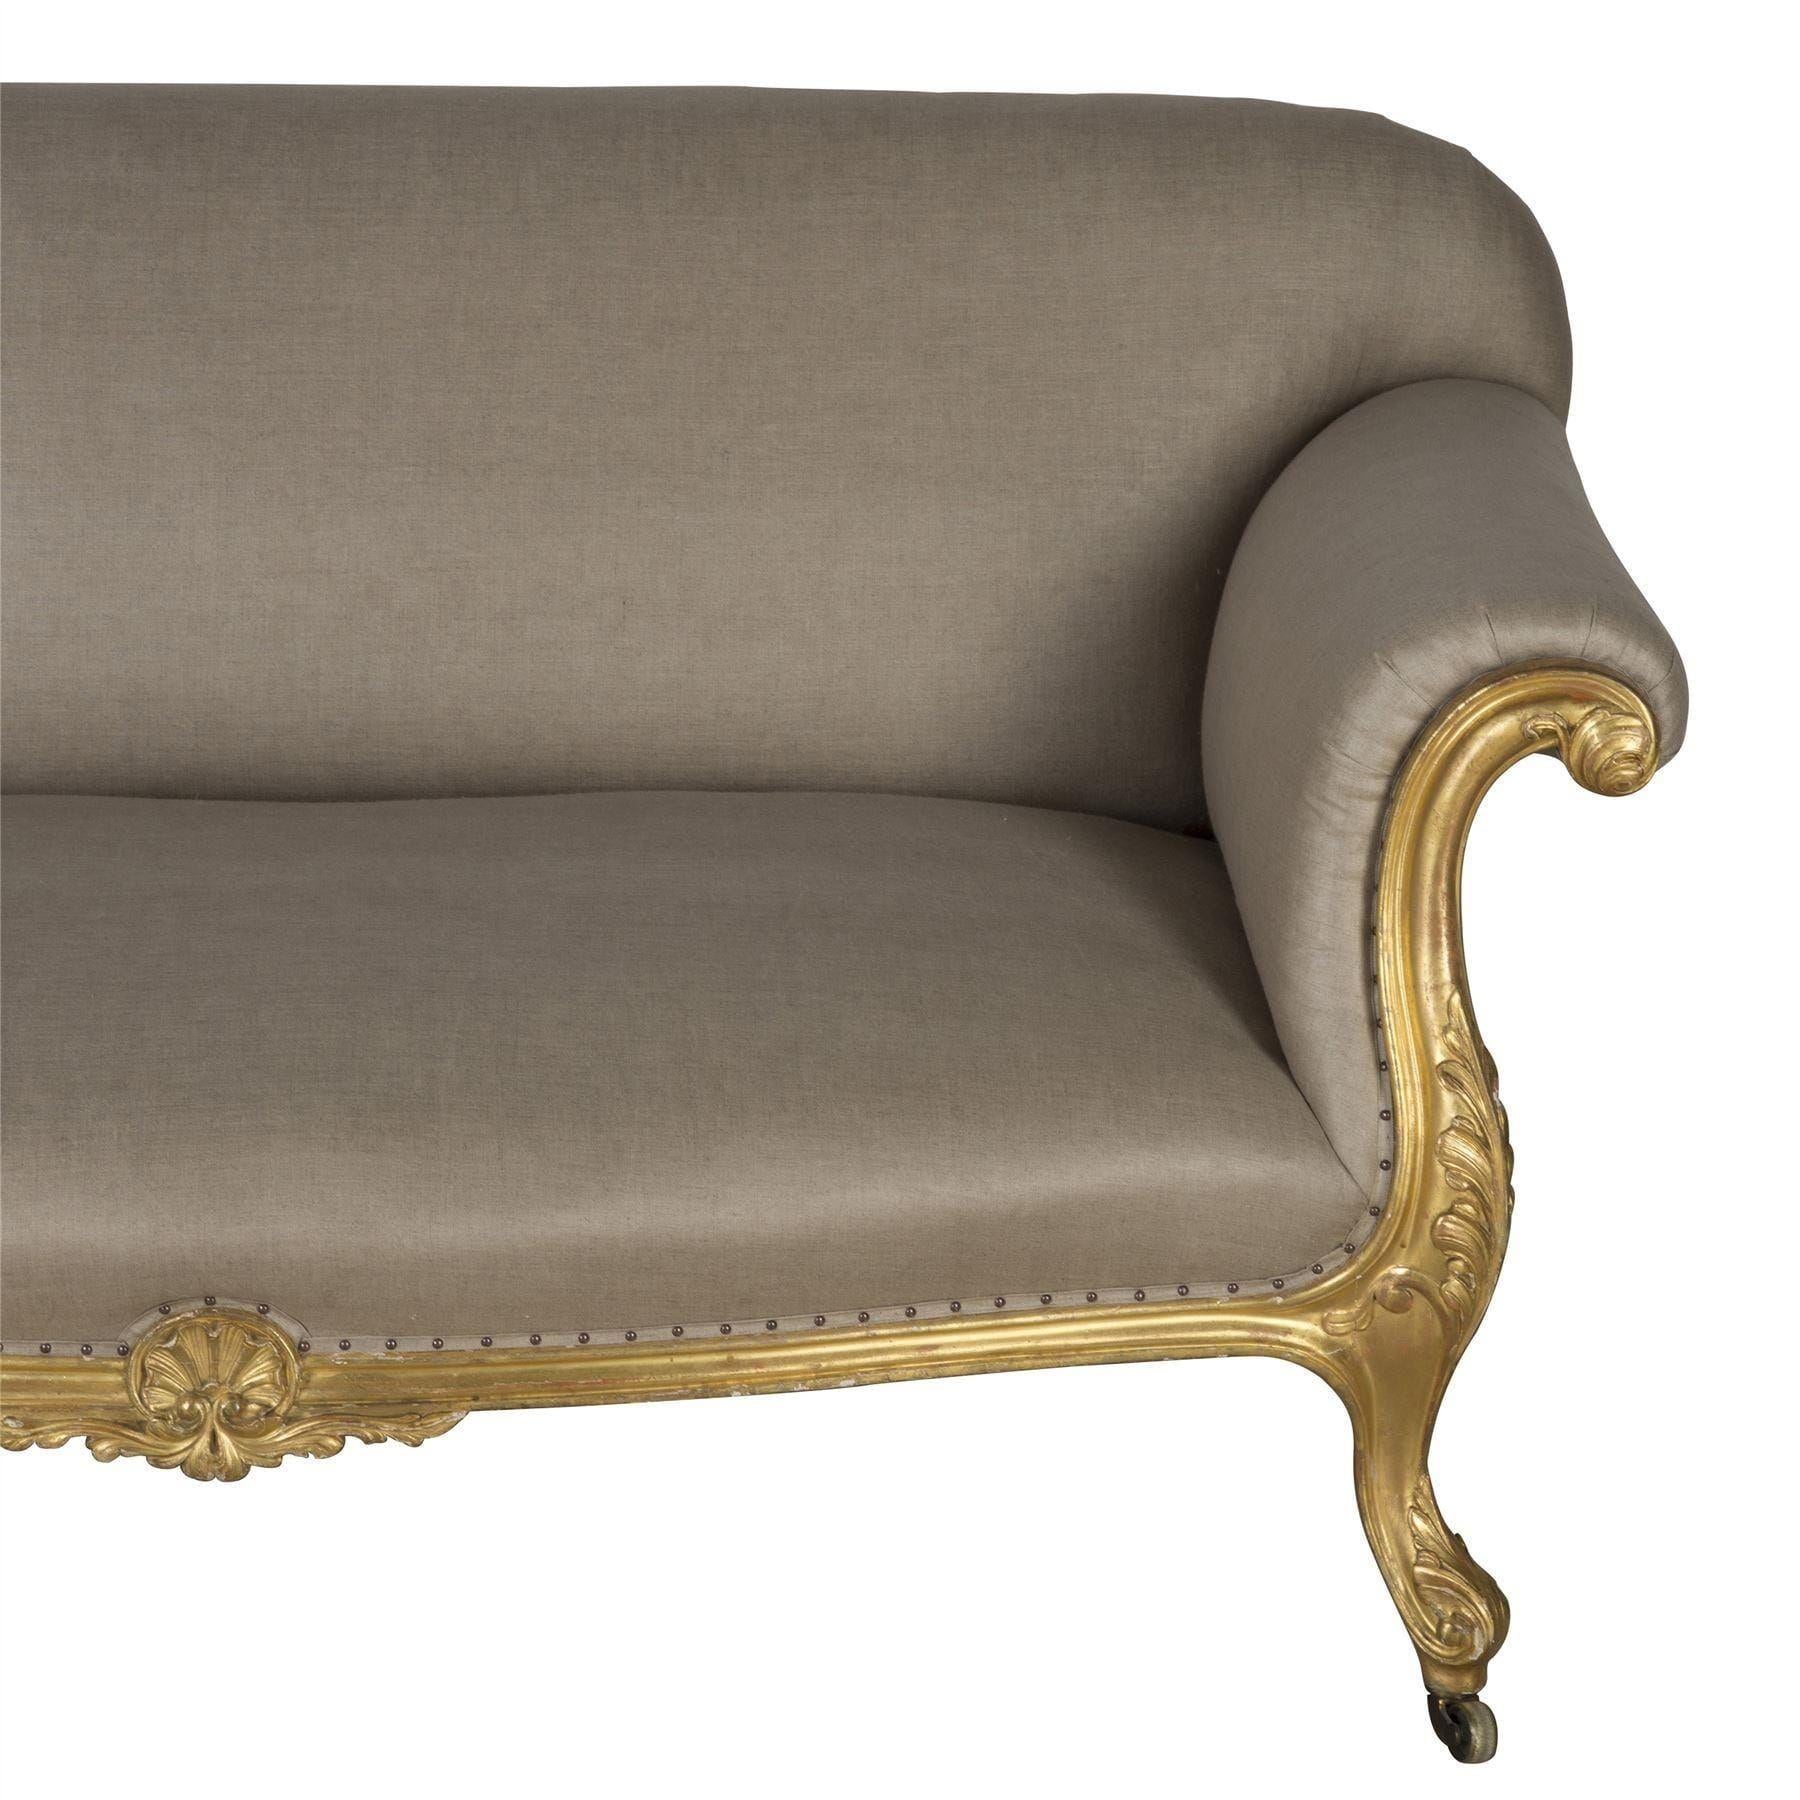 George IV Small Giltwood Sofa In Good Condition For Sale In Gloucestershire, GB